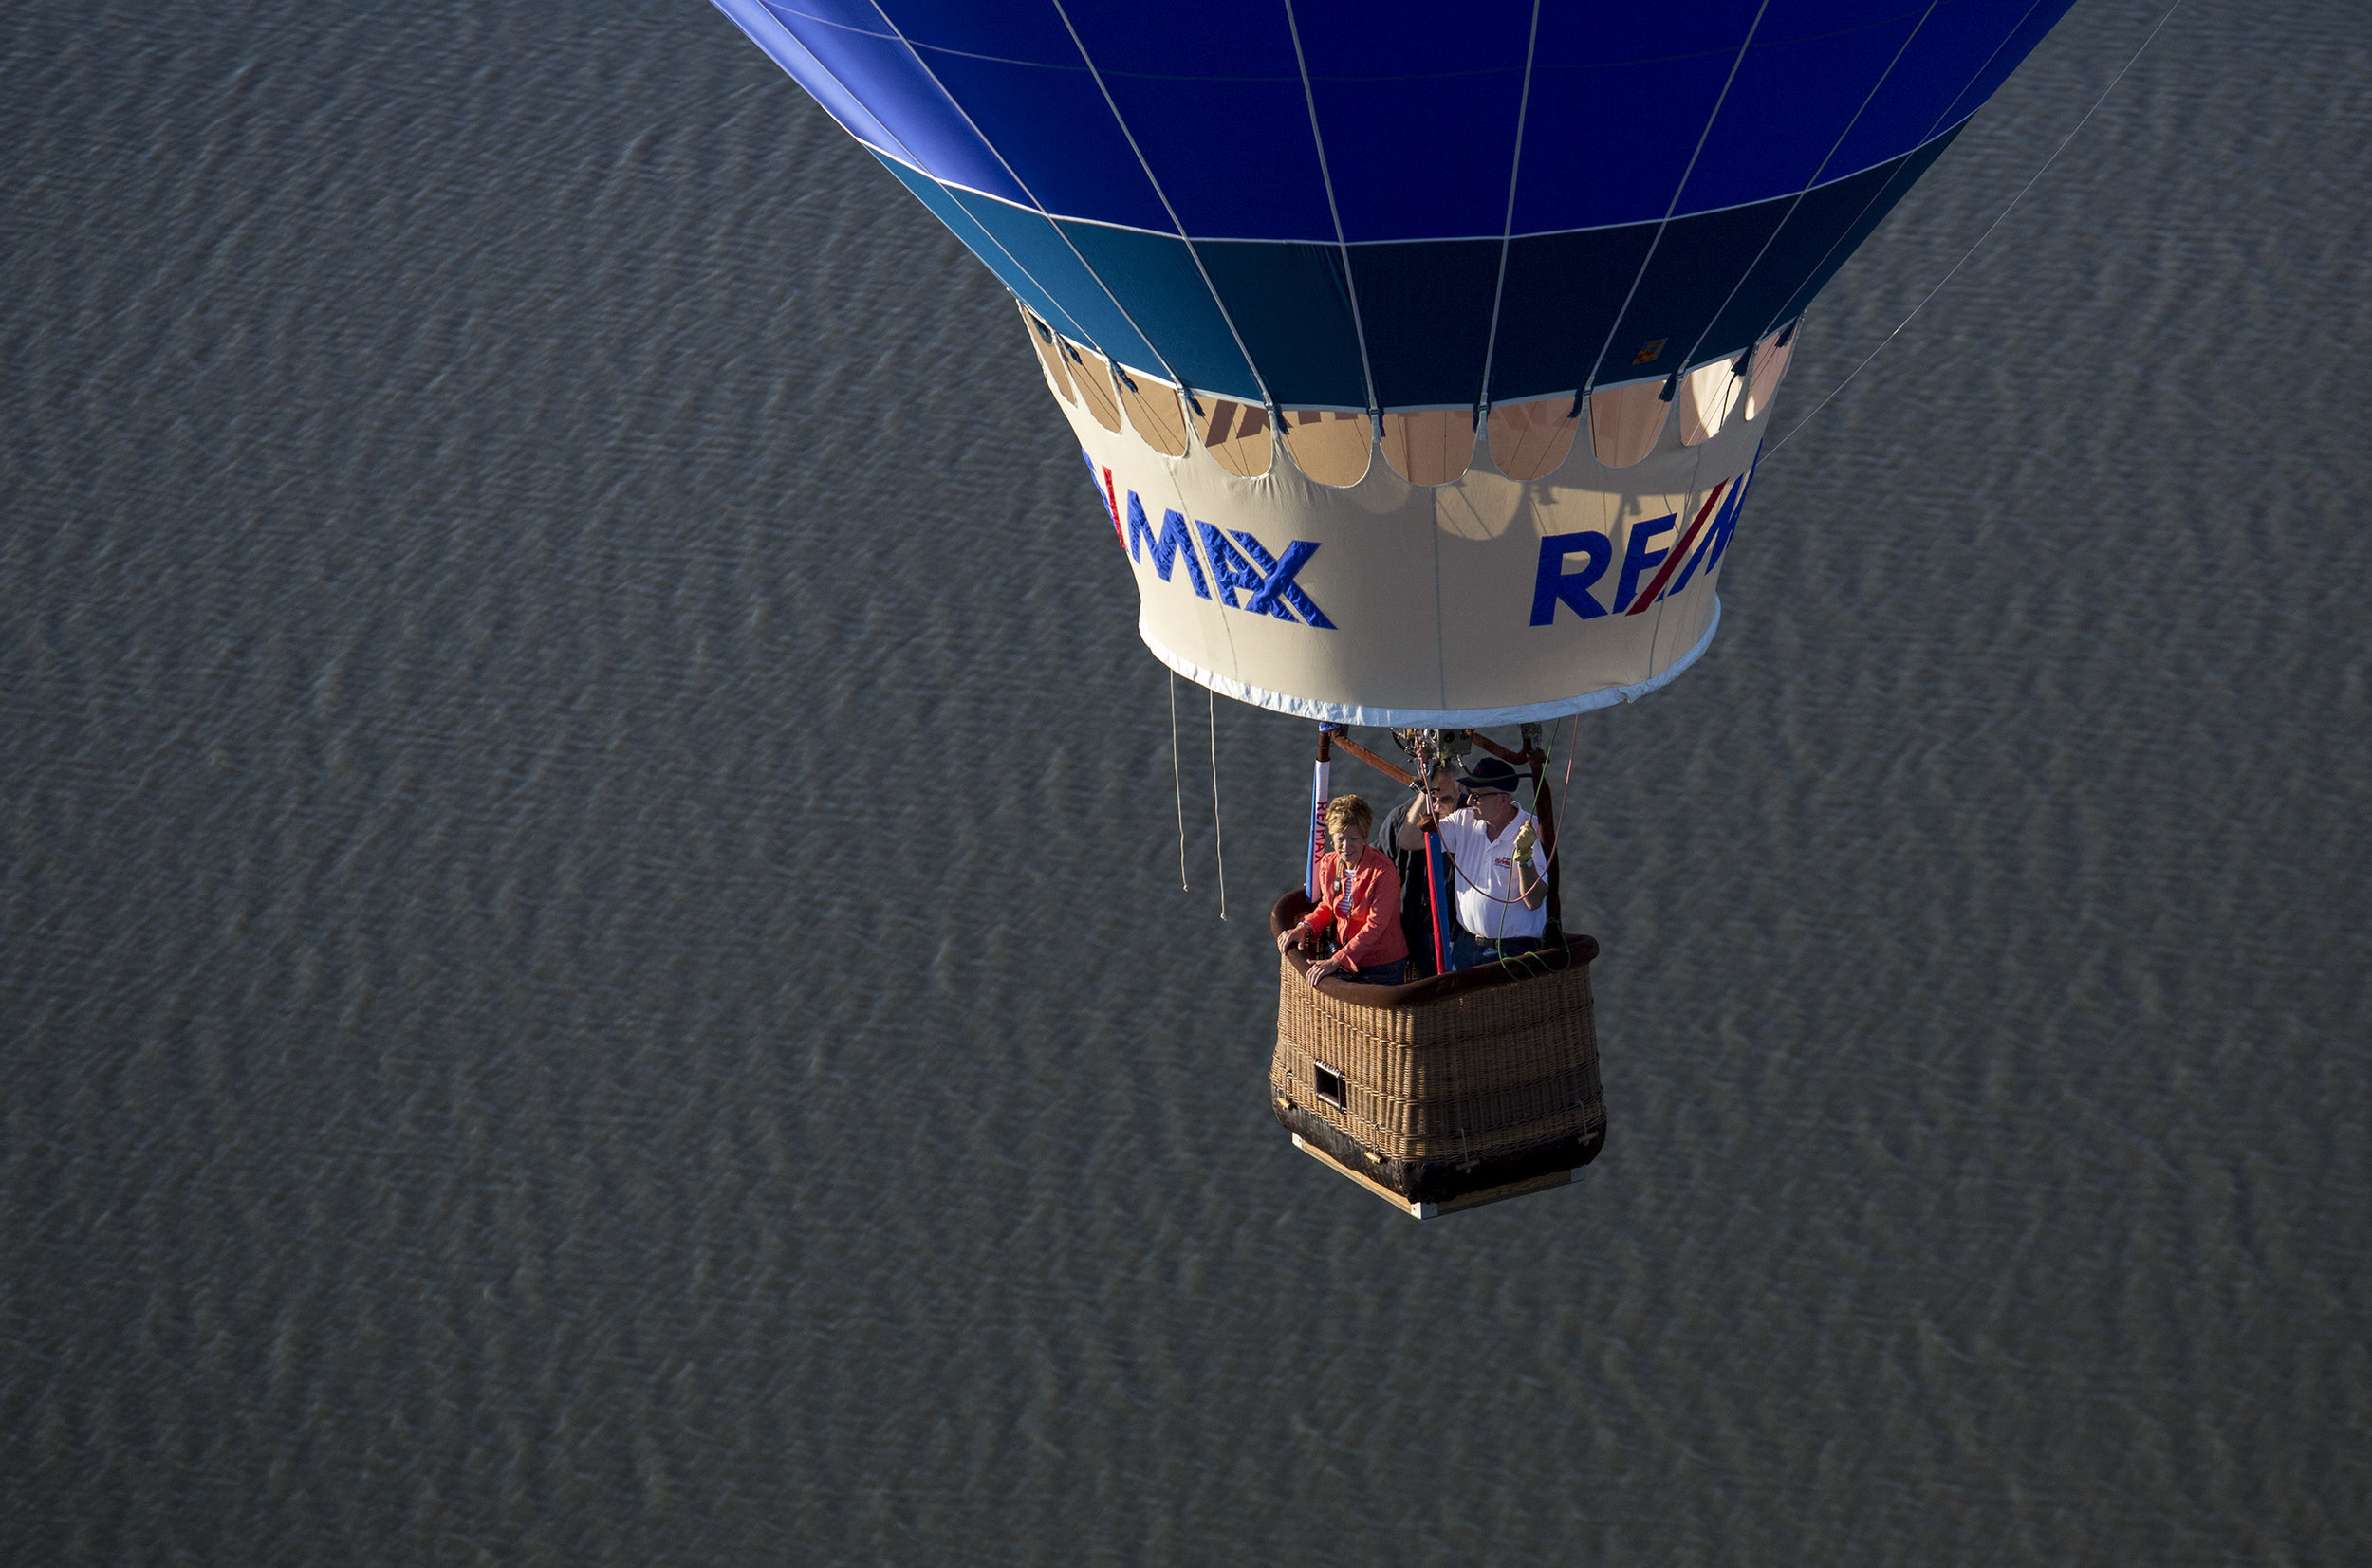  Pilot, Reed Basley, in white, with passengers Dianna and JR Keen fly in the RE/MAX balloon over Smithfield on June 4, 2019. 